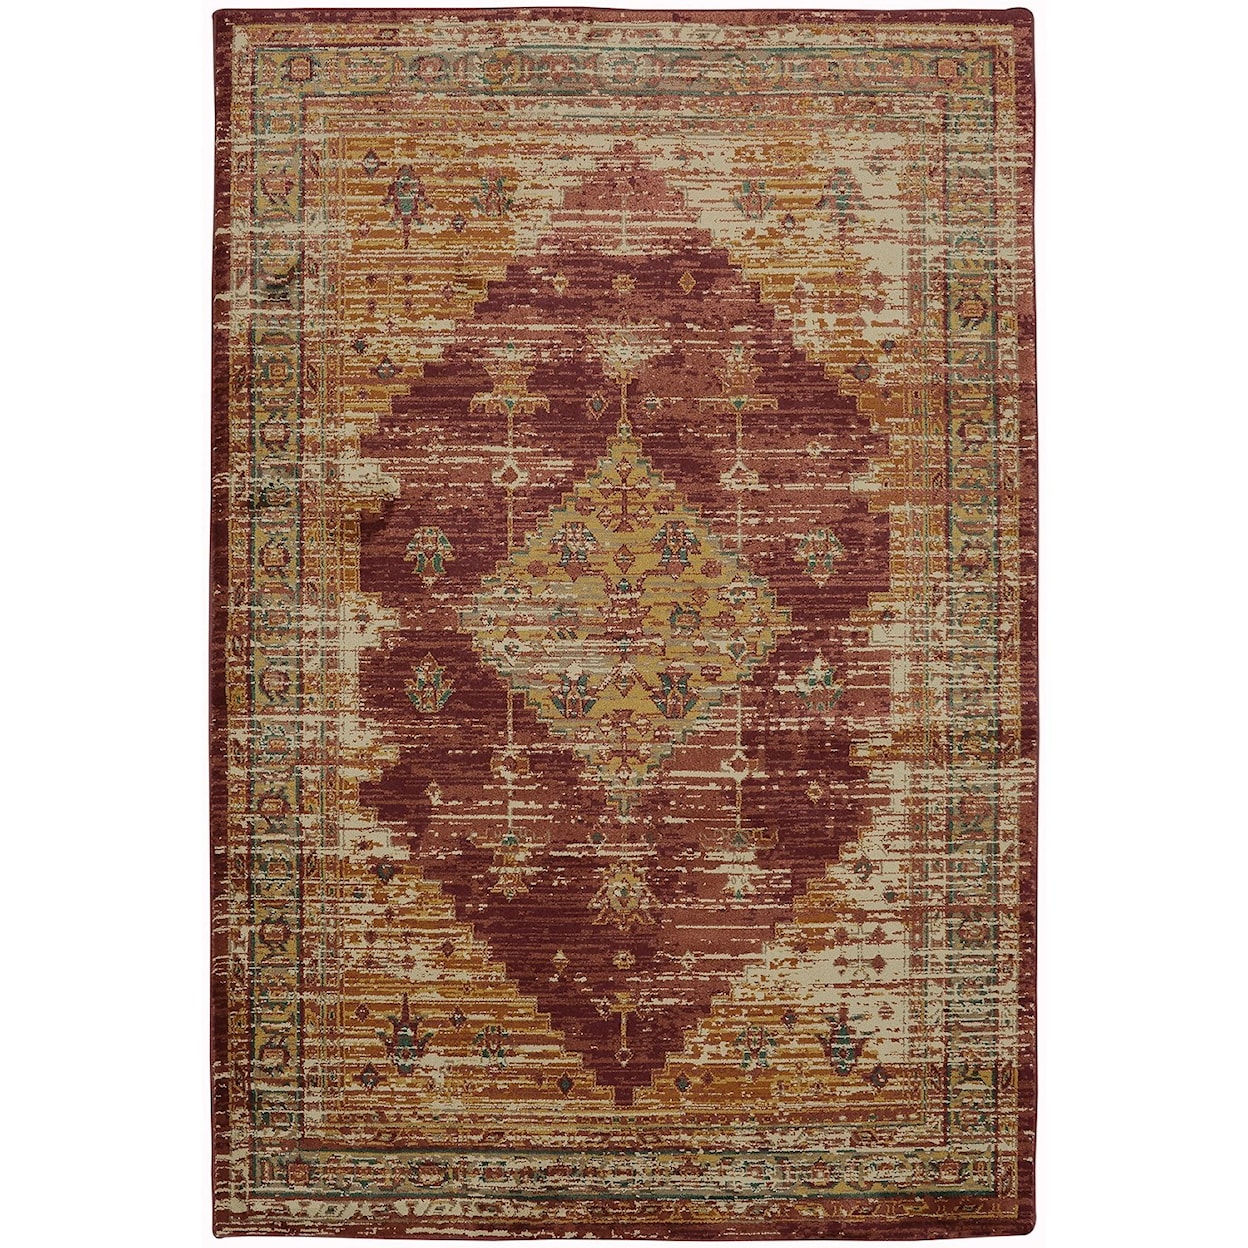 American Rug Craftsmen Providence 9' 6"x12' 11" Parlin Berry Area Rug